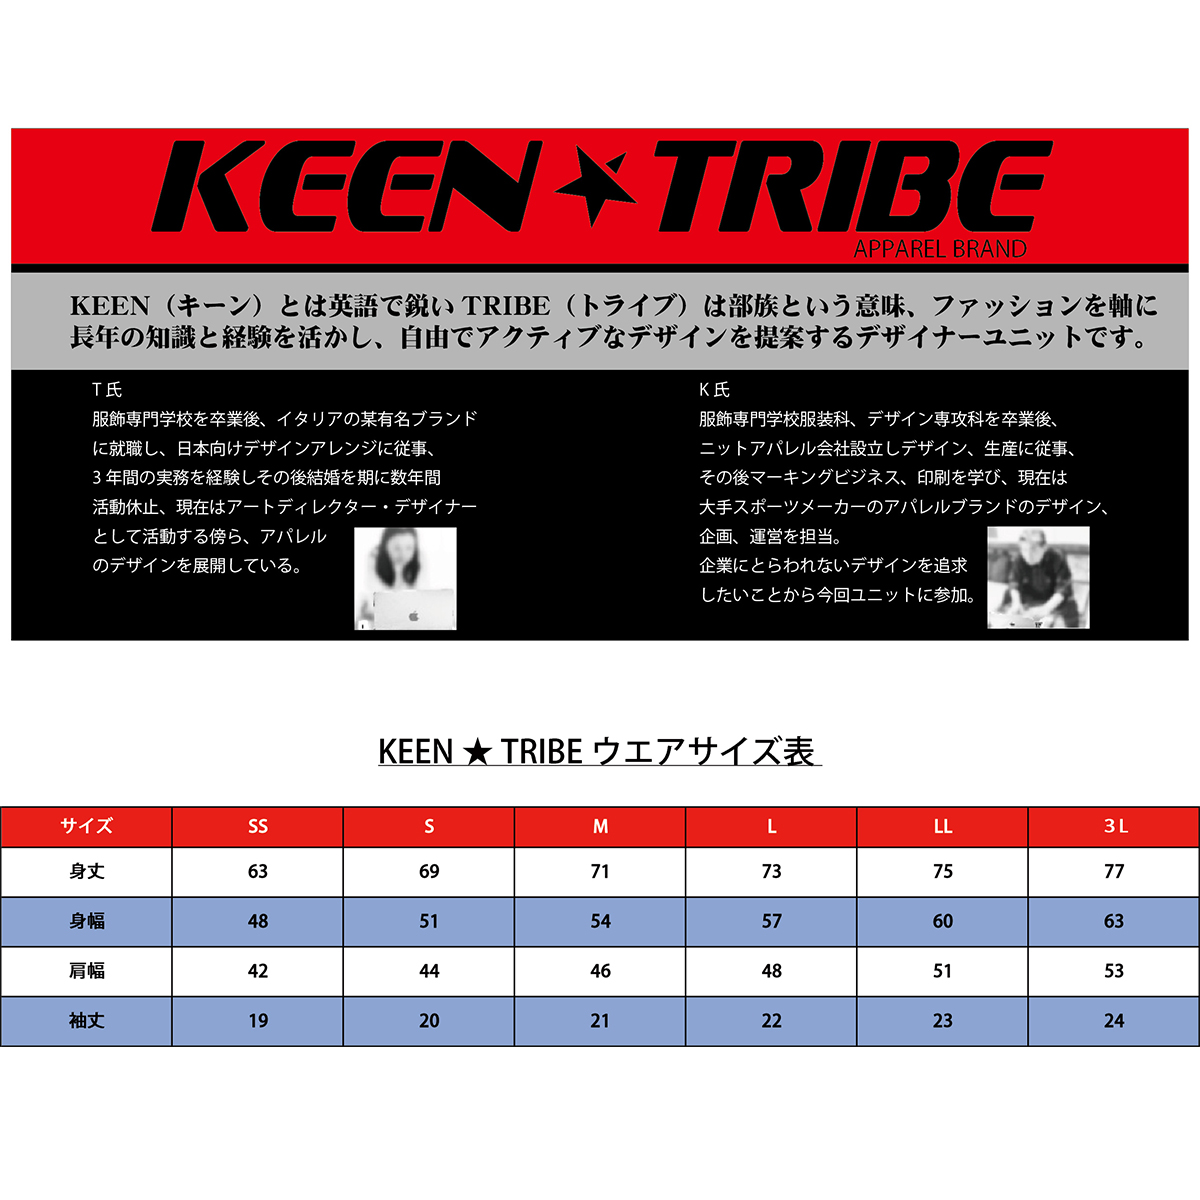 KEEN ★ TRIBE　KT-49(受注生産)